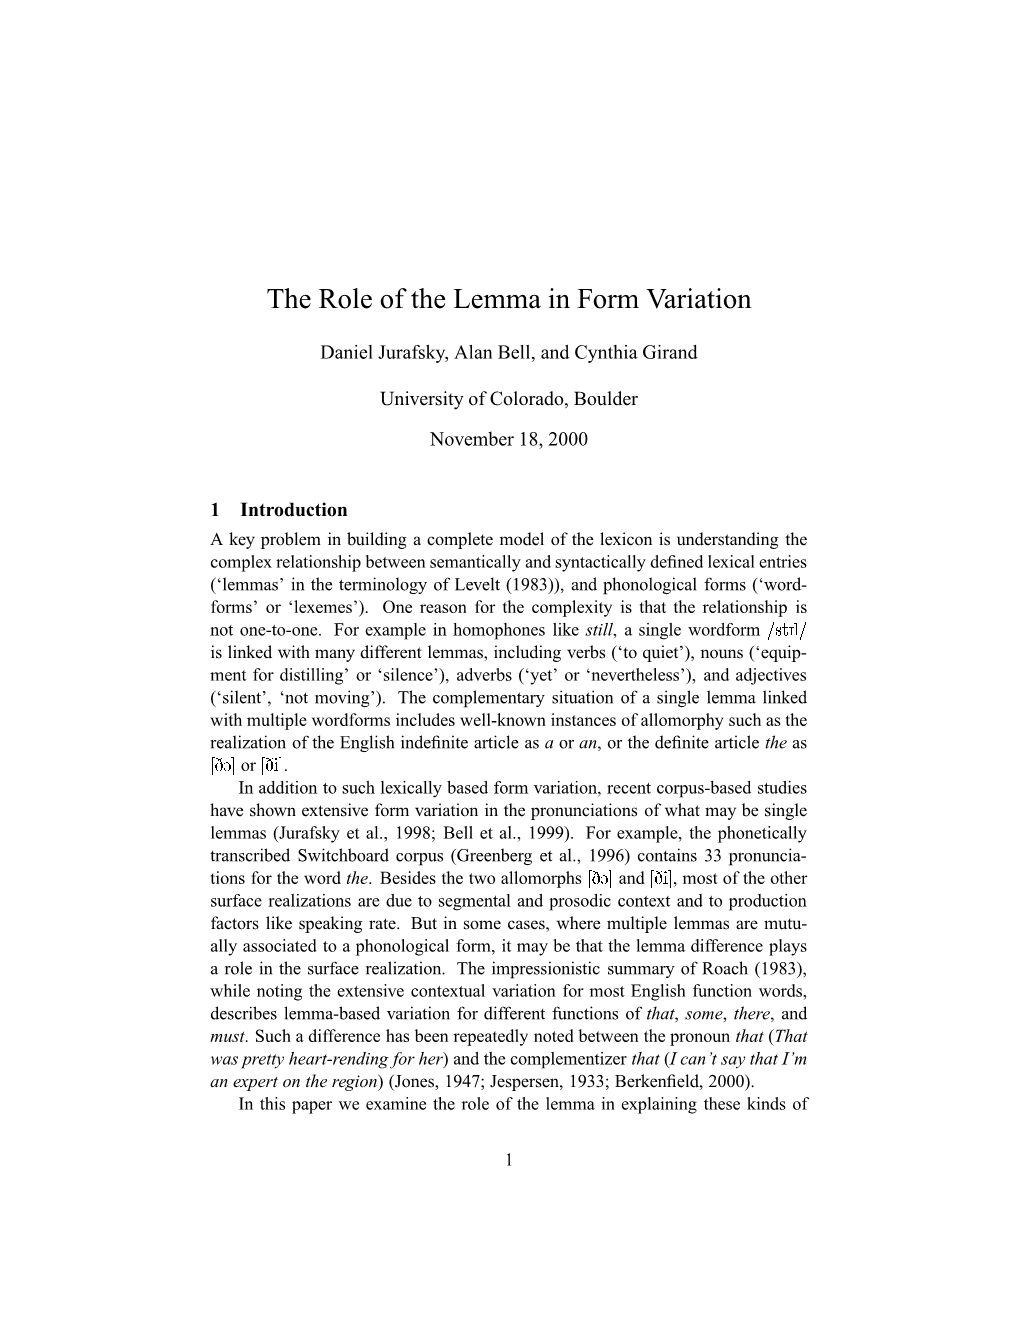 The Role of the Lemma in Form Variation